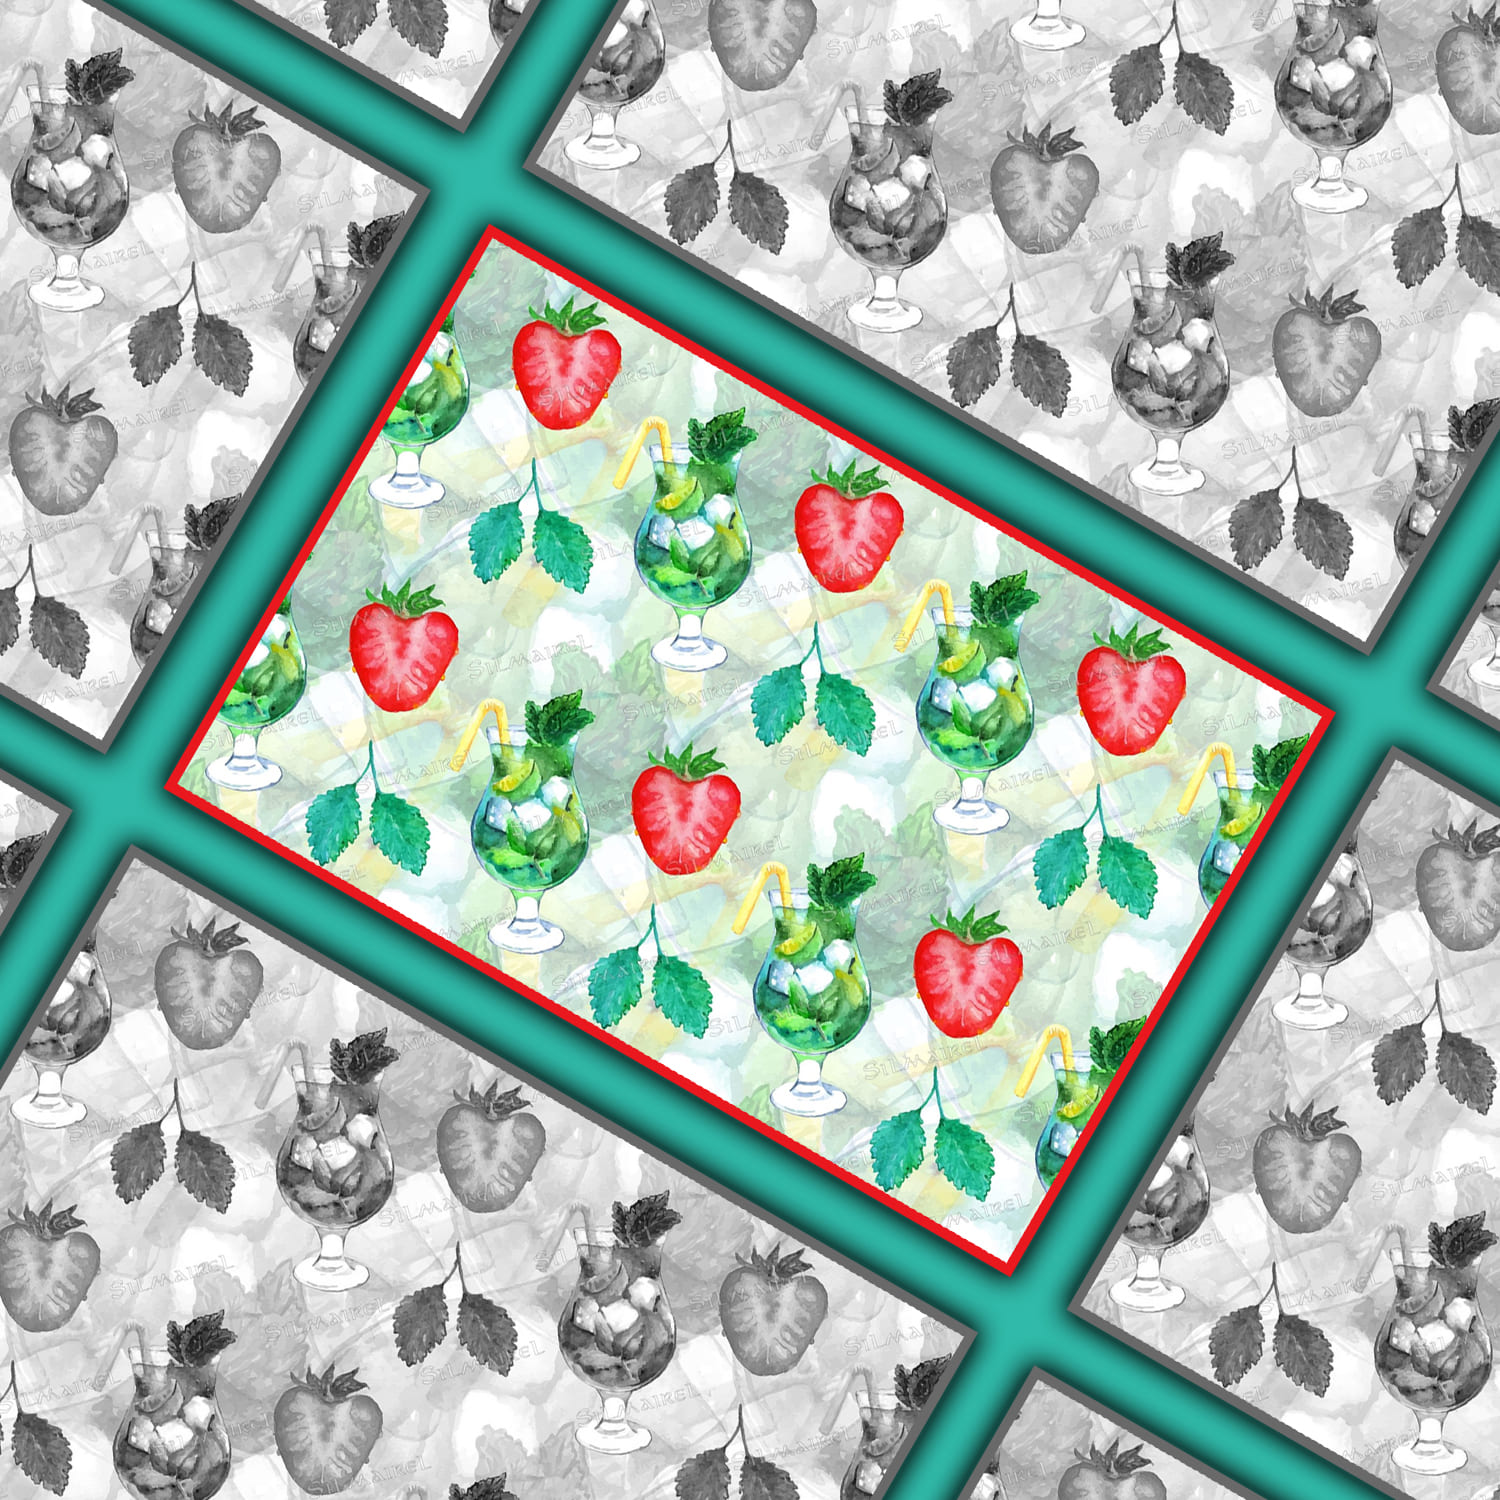 Diagonal picture with color and black and white patterns with images of strawberries and mojitos.